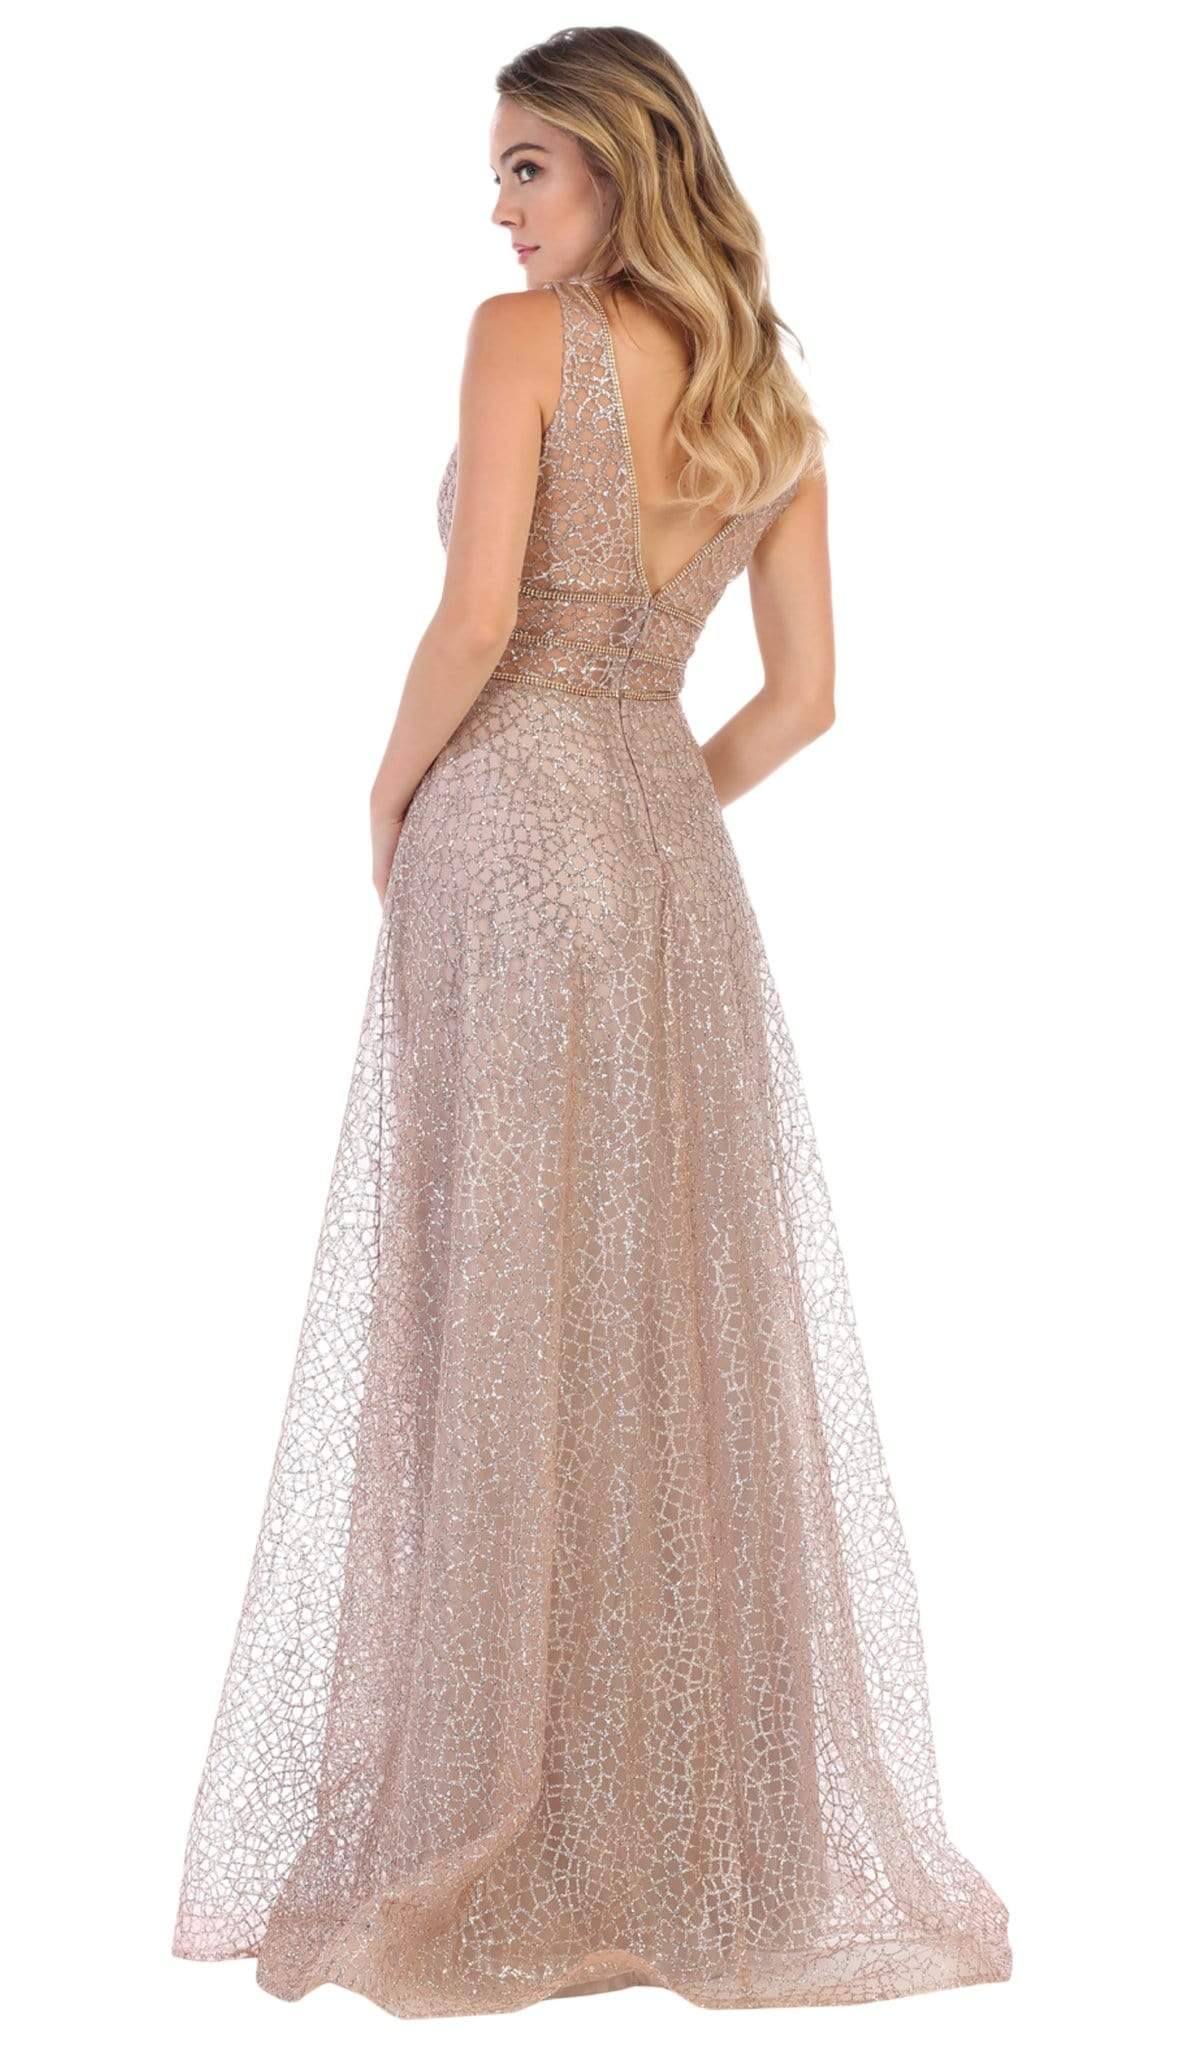 May Queen - MQ-1623 Sleeveless V-Neck Glitter Tulle A-Line Gown Special Occasion Dress